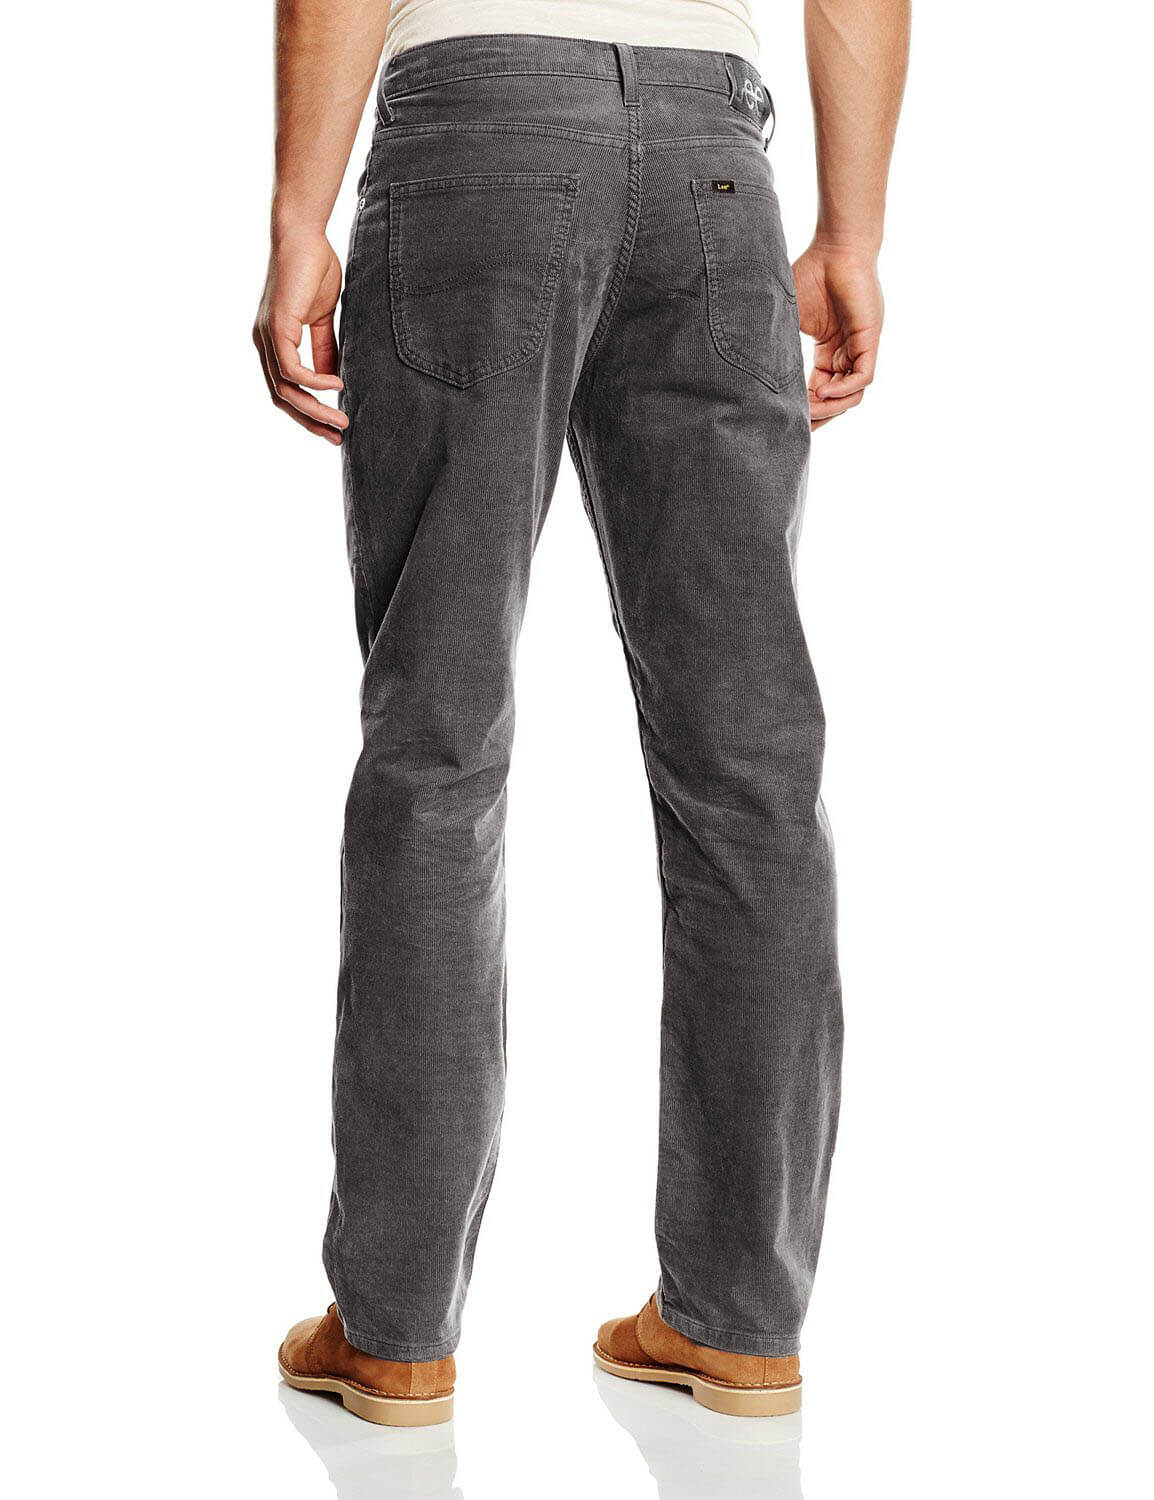 Lee Brooklyn New Men’s Cords Charcoal Grey Stretch Corduroy Jeans ...